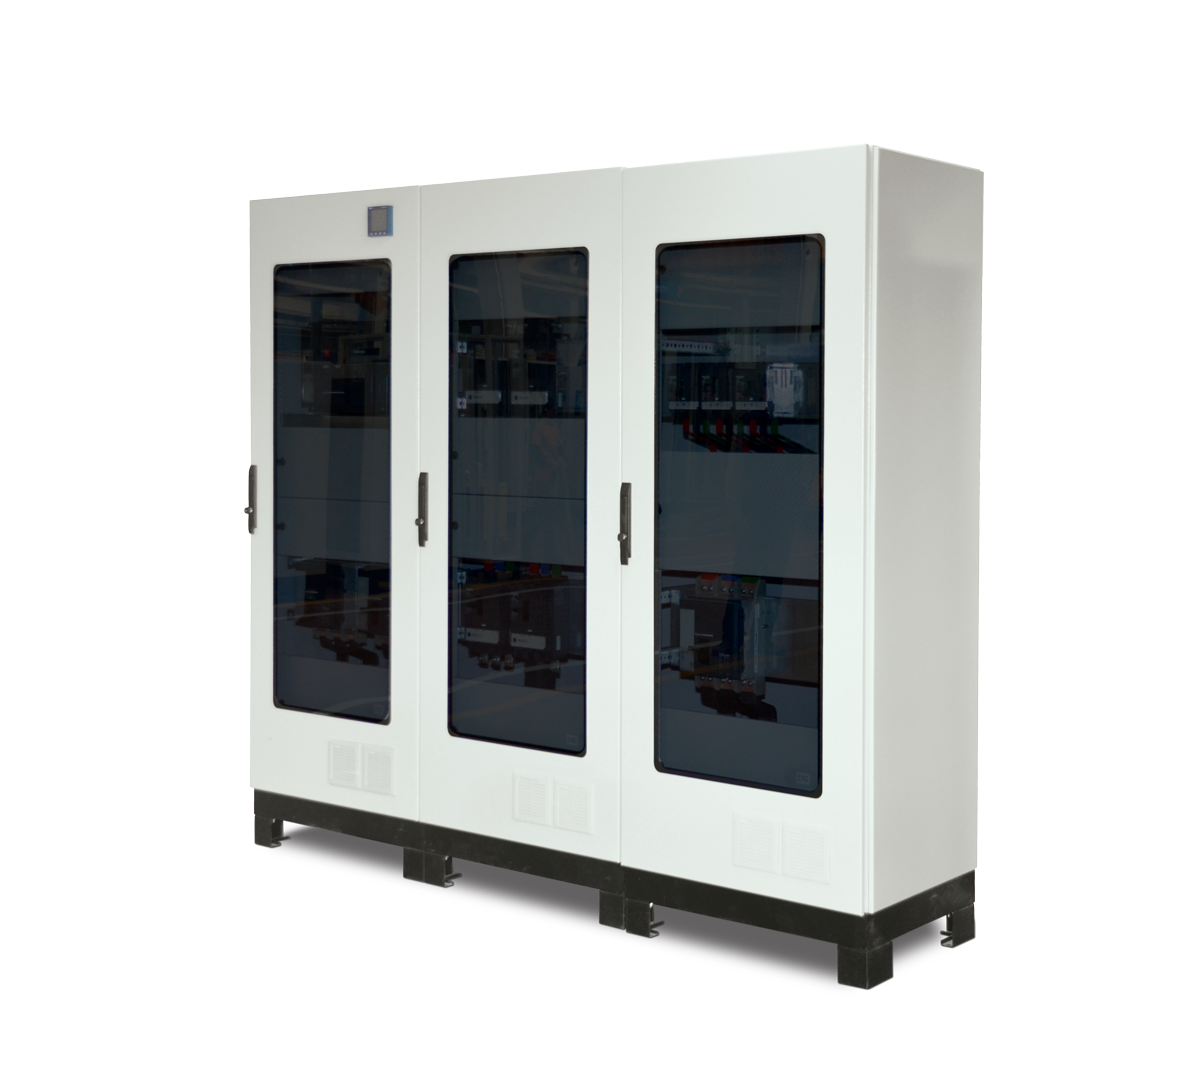 LTD - Switch Panels Center and Secondary Distribution Panels are Inner Covered